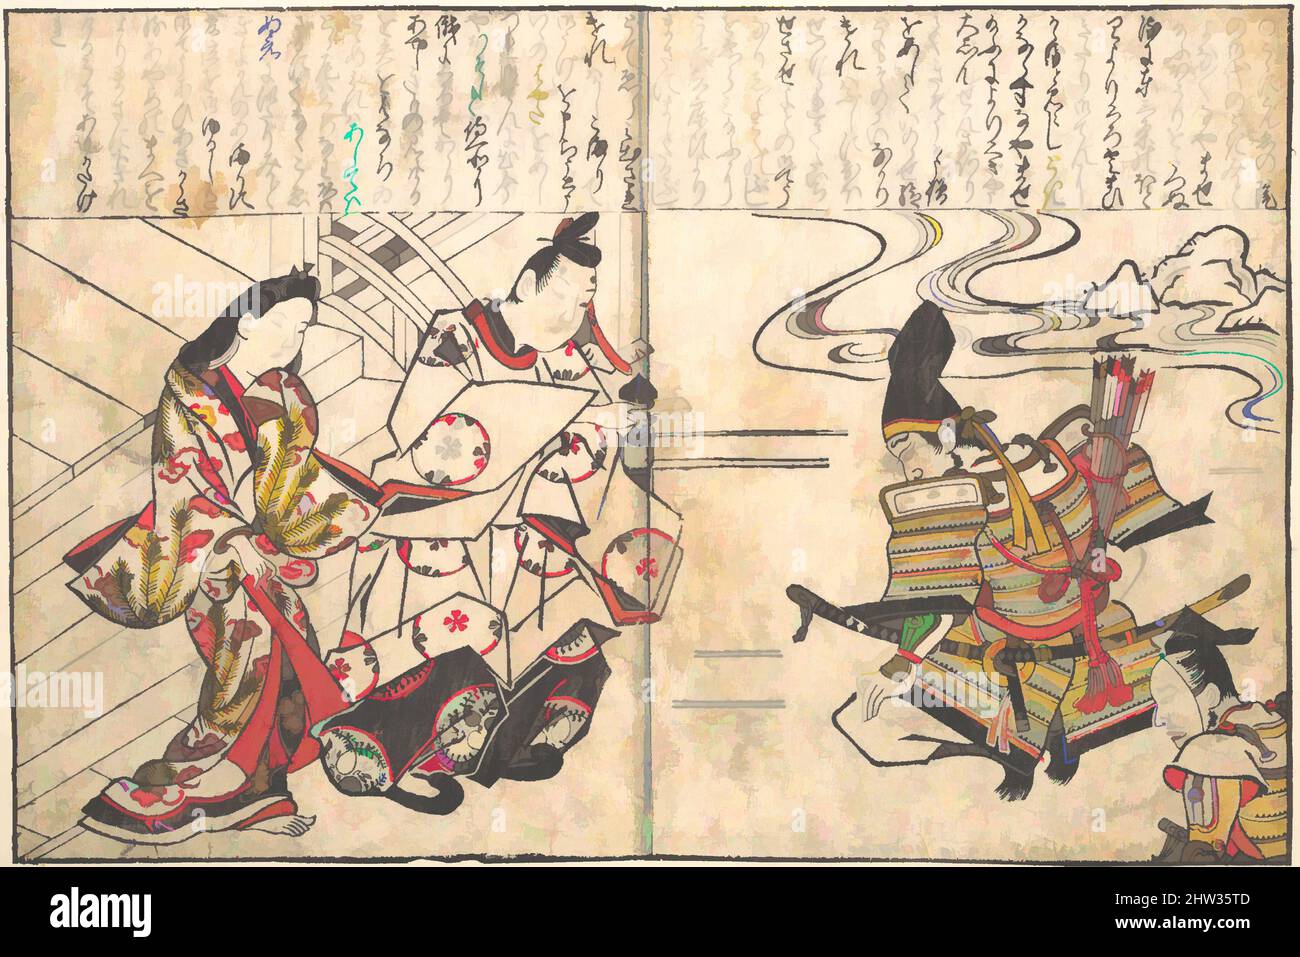 Art inspired by The Lady Ayame Being Brought to Minamoto no Yorimasa, Edo period (1615–1868), ca. 1685, Japan, Polychrome woodblock print; ink and color on paper, 8 5/8 x 12 7/8 in. (21.9 x 32.7 cm), Prints, Hishikawa Moronobu (Japanese, died 1694, Classic works modernized by Artotop with a splash of modernity. Shapes, color and value, eye-catching visual impact on art. Emotions through freedom of artworks in a contemporary way. A timeless message pursuing a wildly creative new direction. Artists turning to the digital medium and creating the Artotop NFT Stock Photo